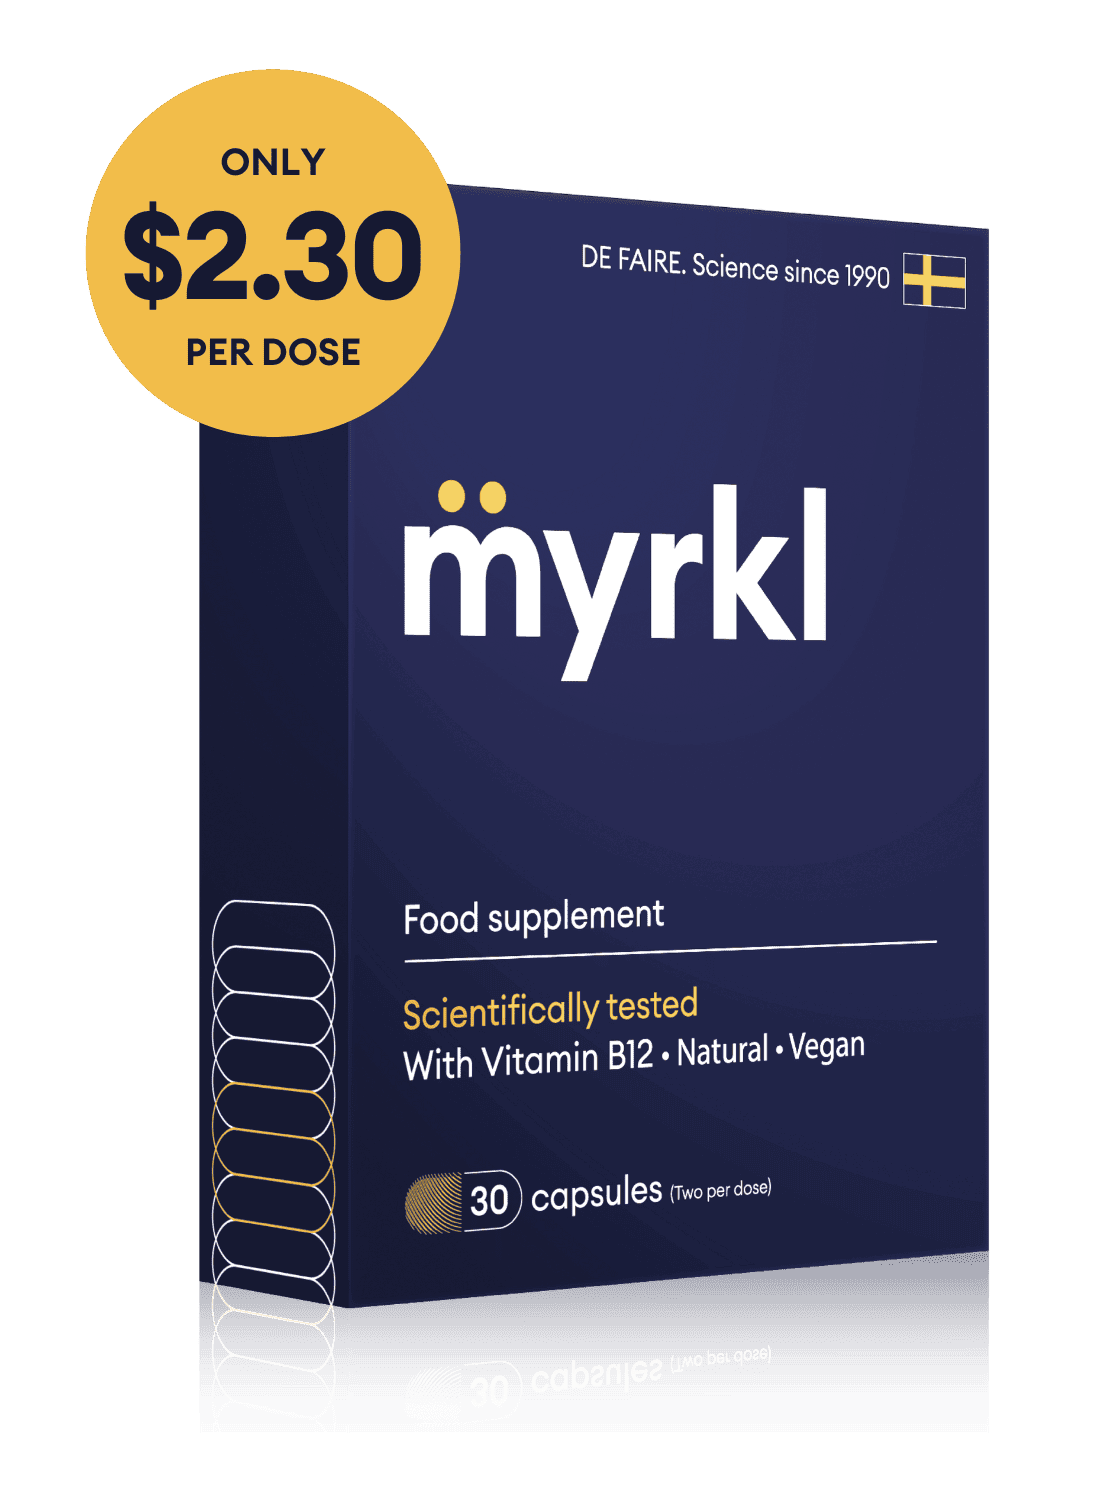 Myrkl scientfically tested food supplement, result of 30 years of R&D